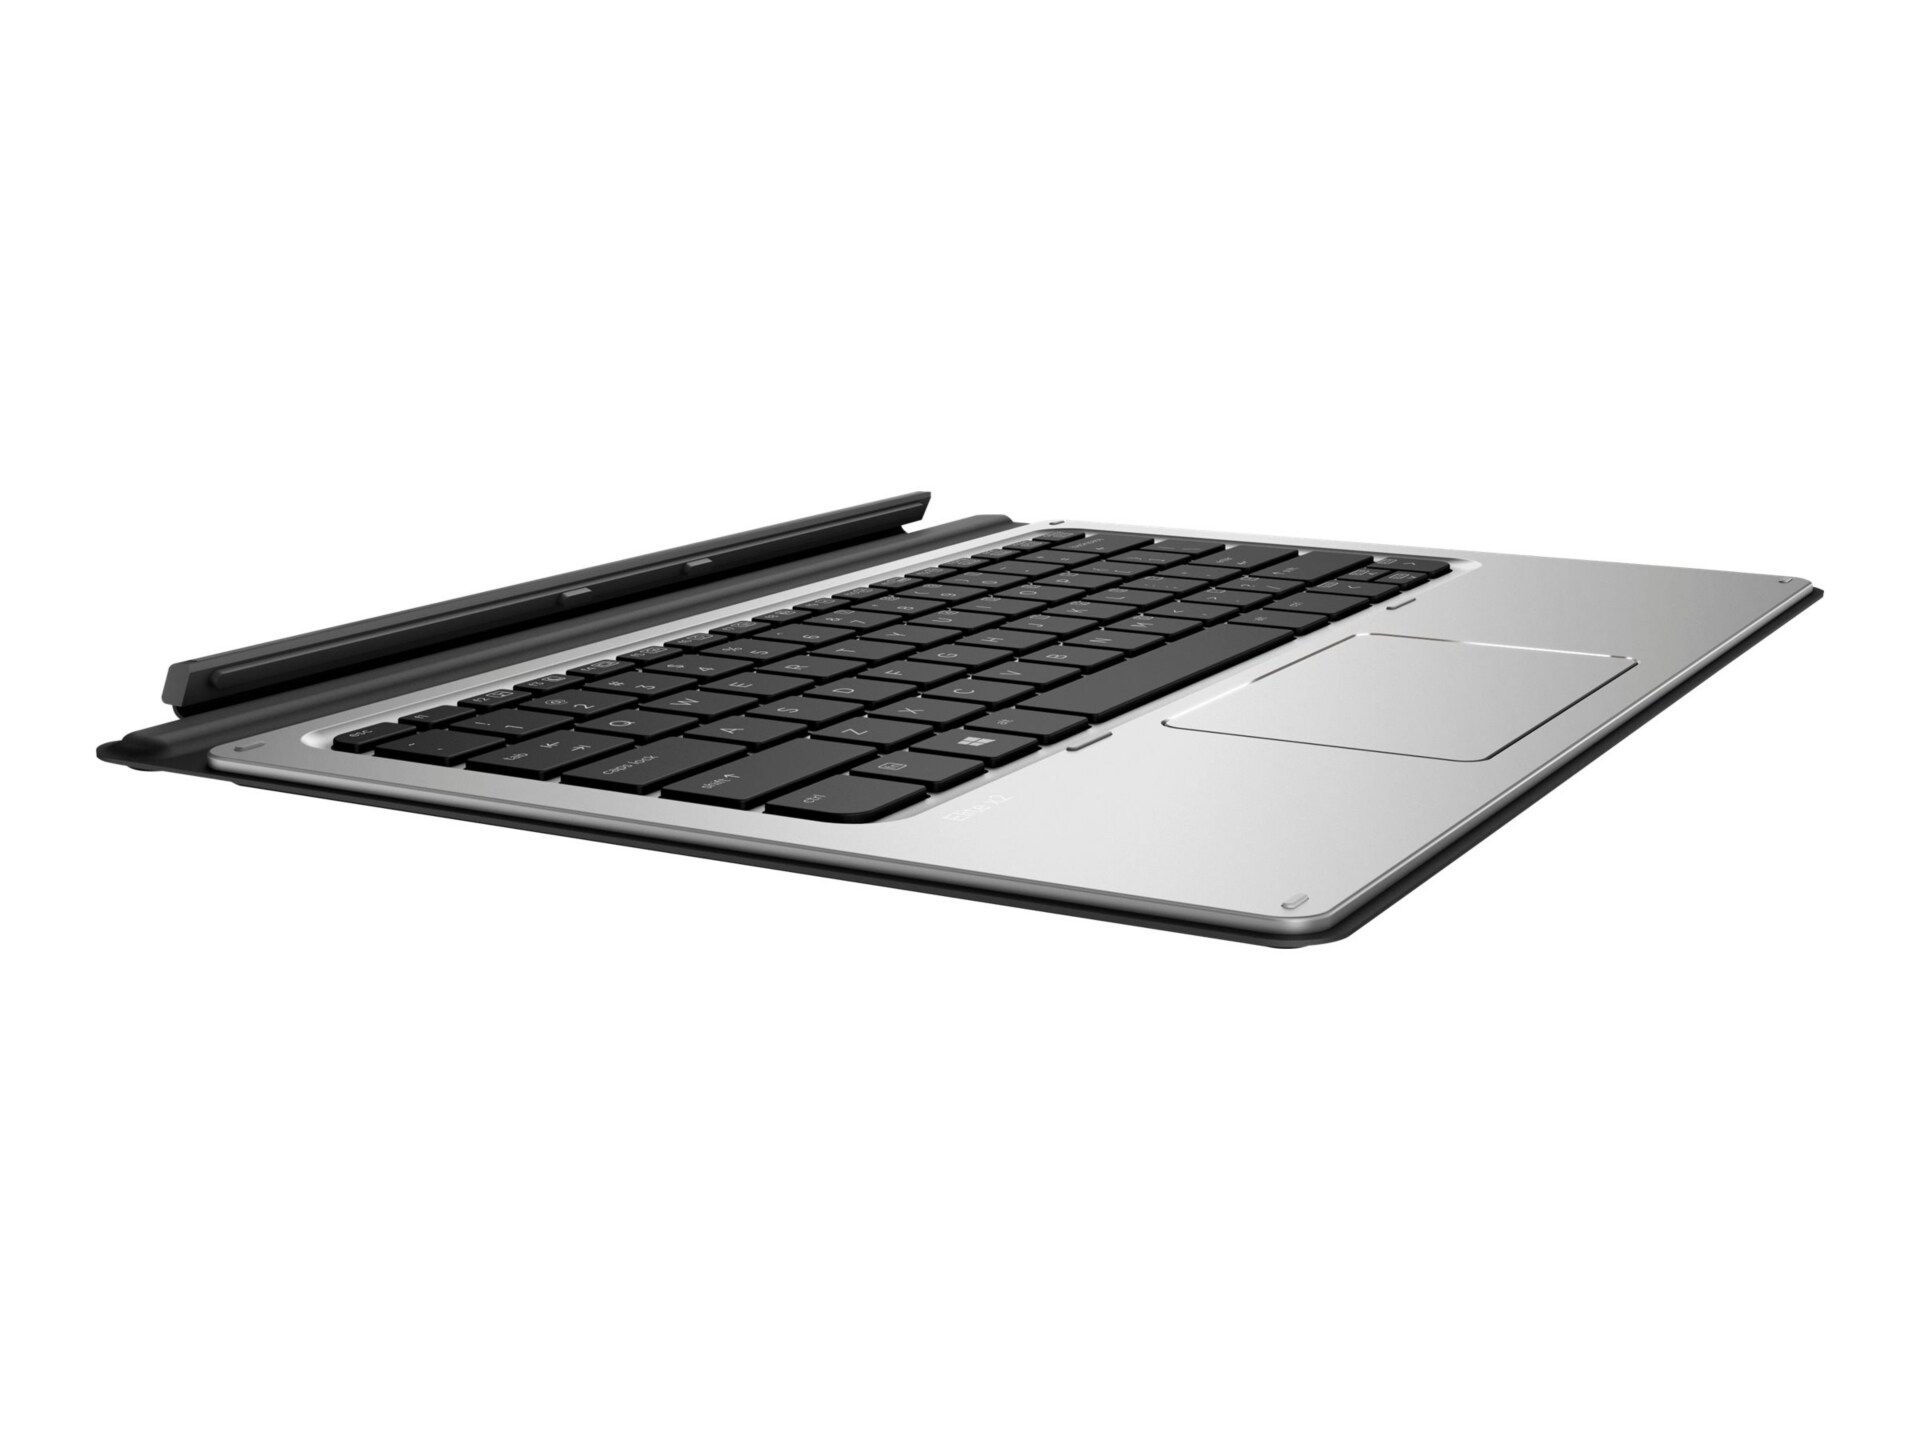 HP Travel - keyboard - with touchpad - US